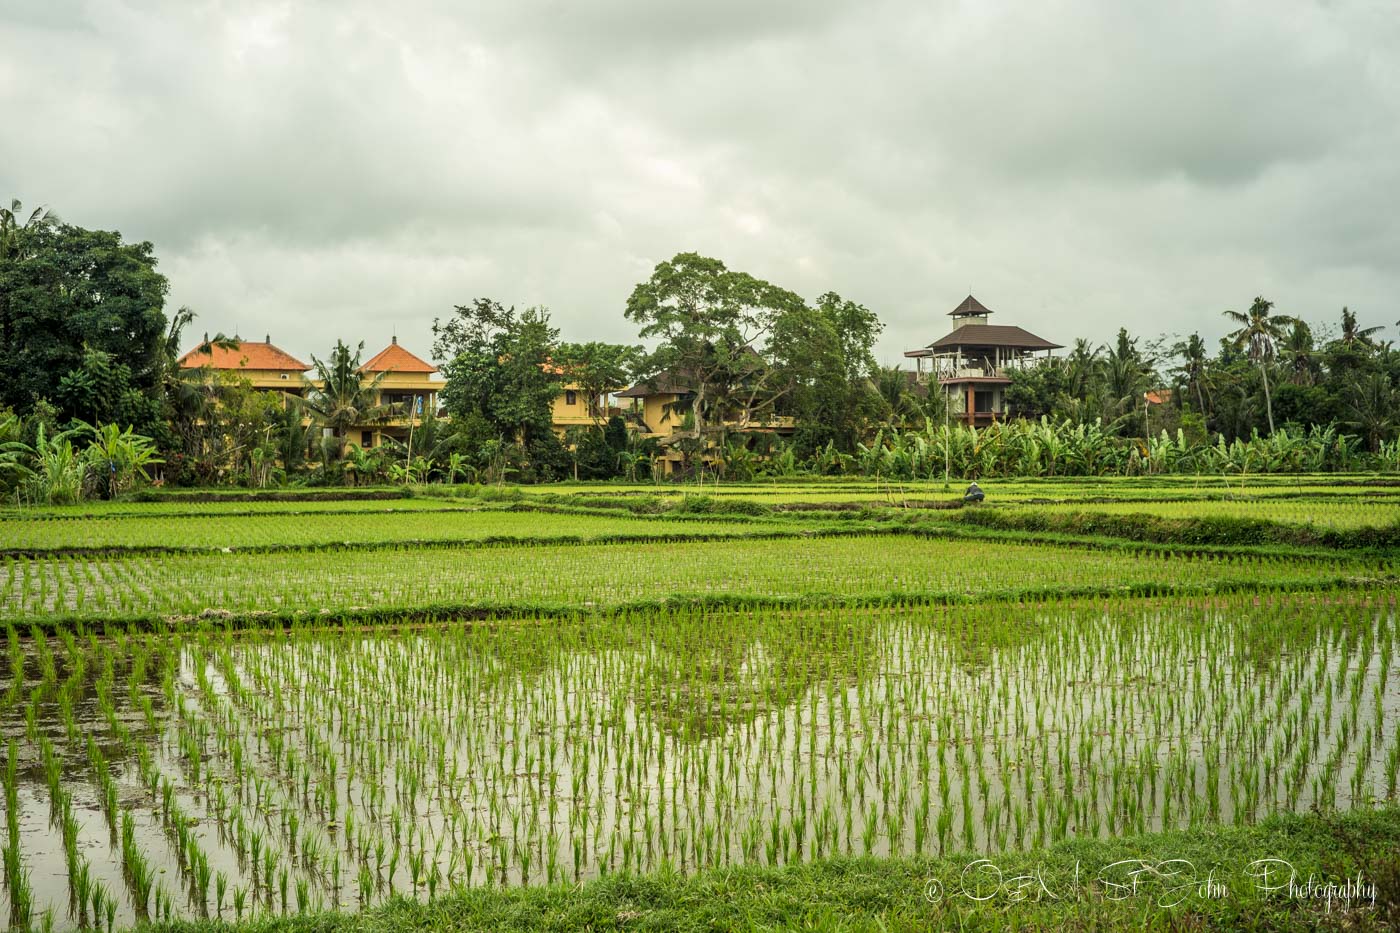 2 Weeks in Indonesia: Rice paddy fields in Bali, Indonesia